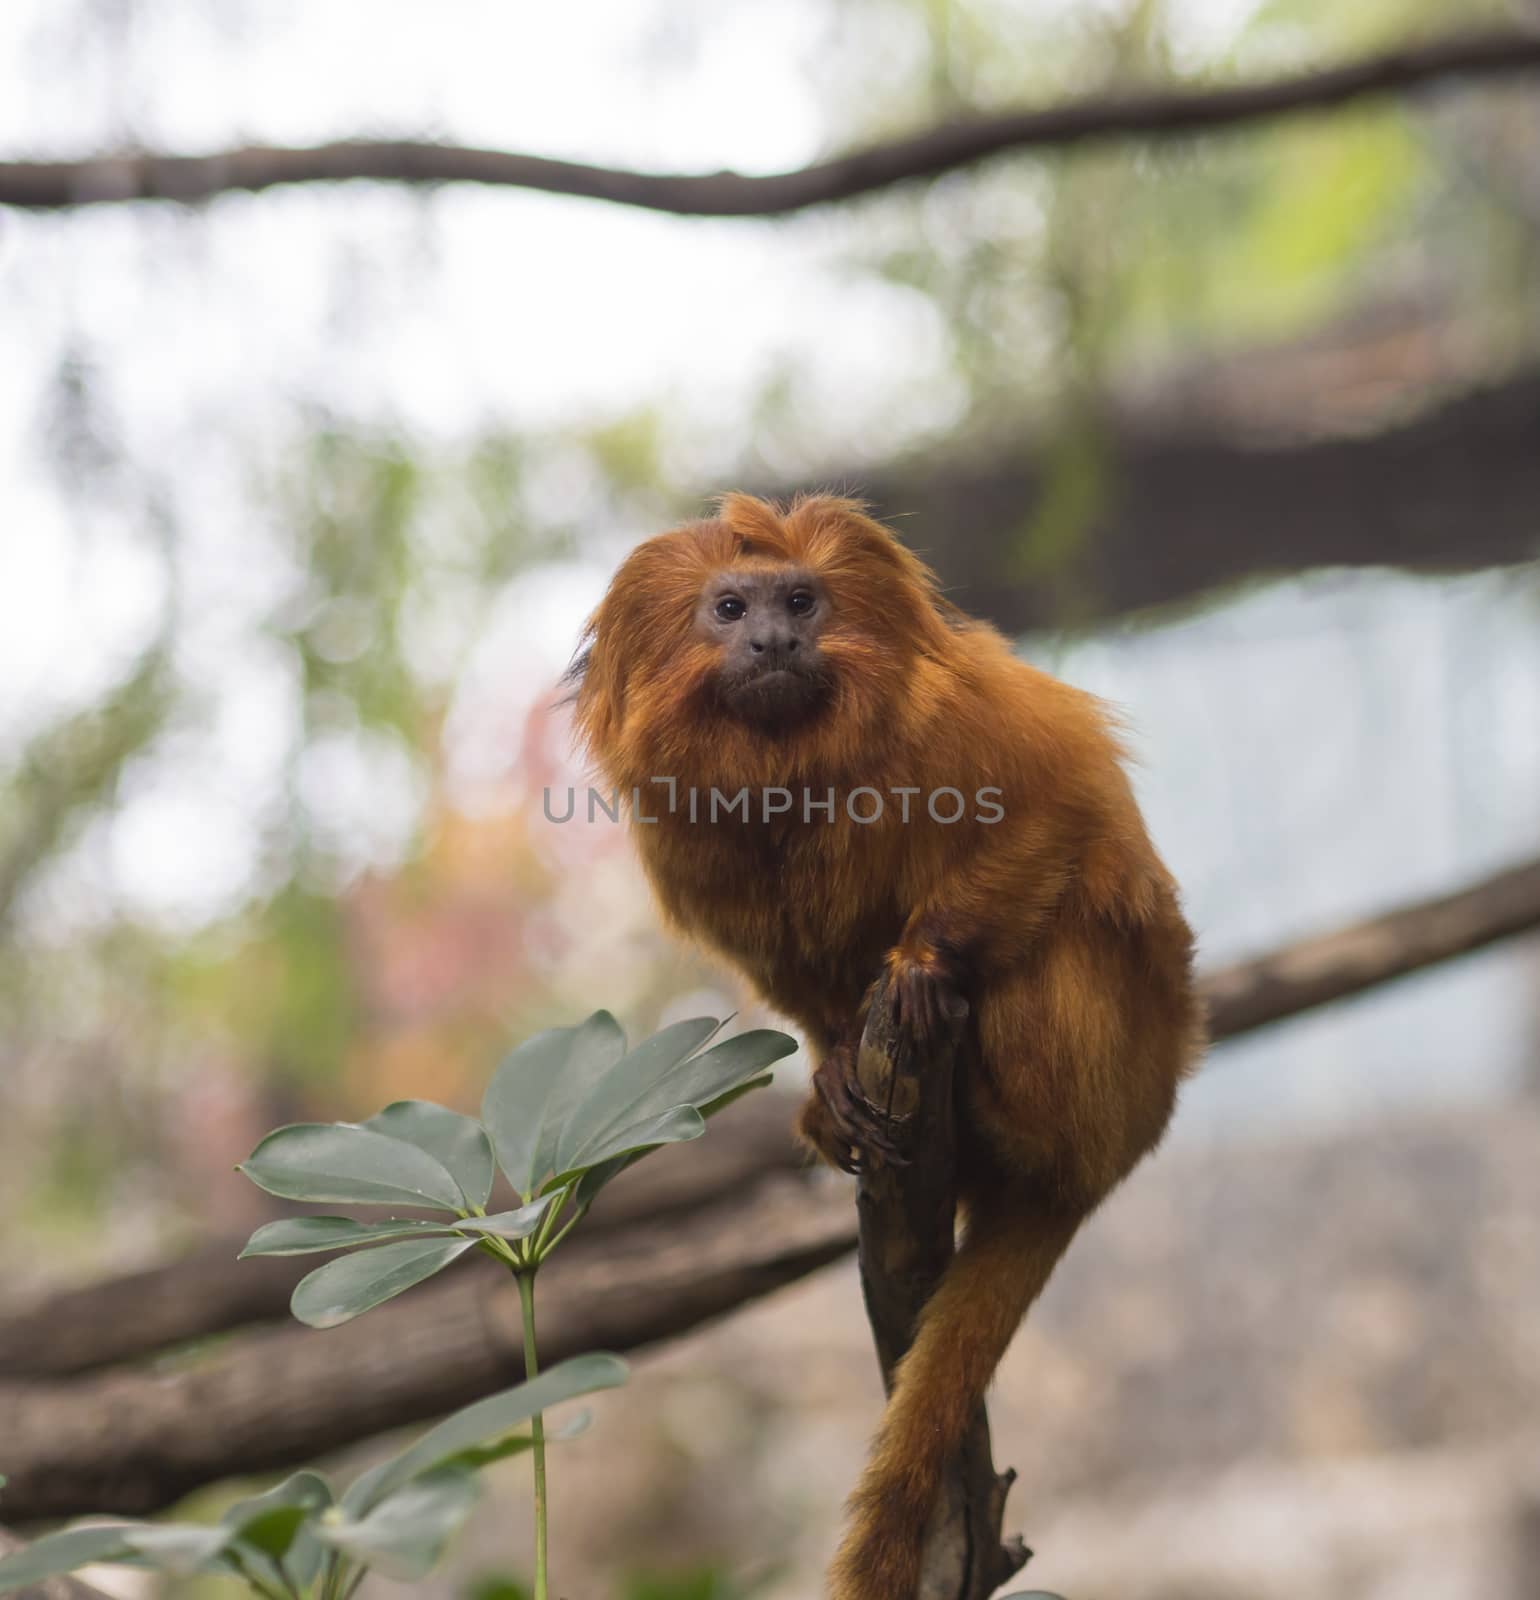 close up Golden lion tamarin (Leontopithecus rosalia) sitting on the tree branch, green leaves, selective focus